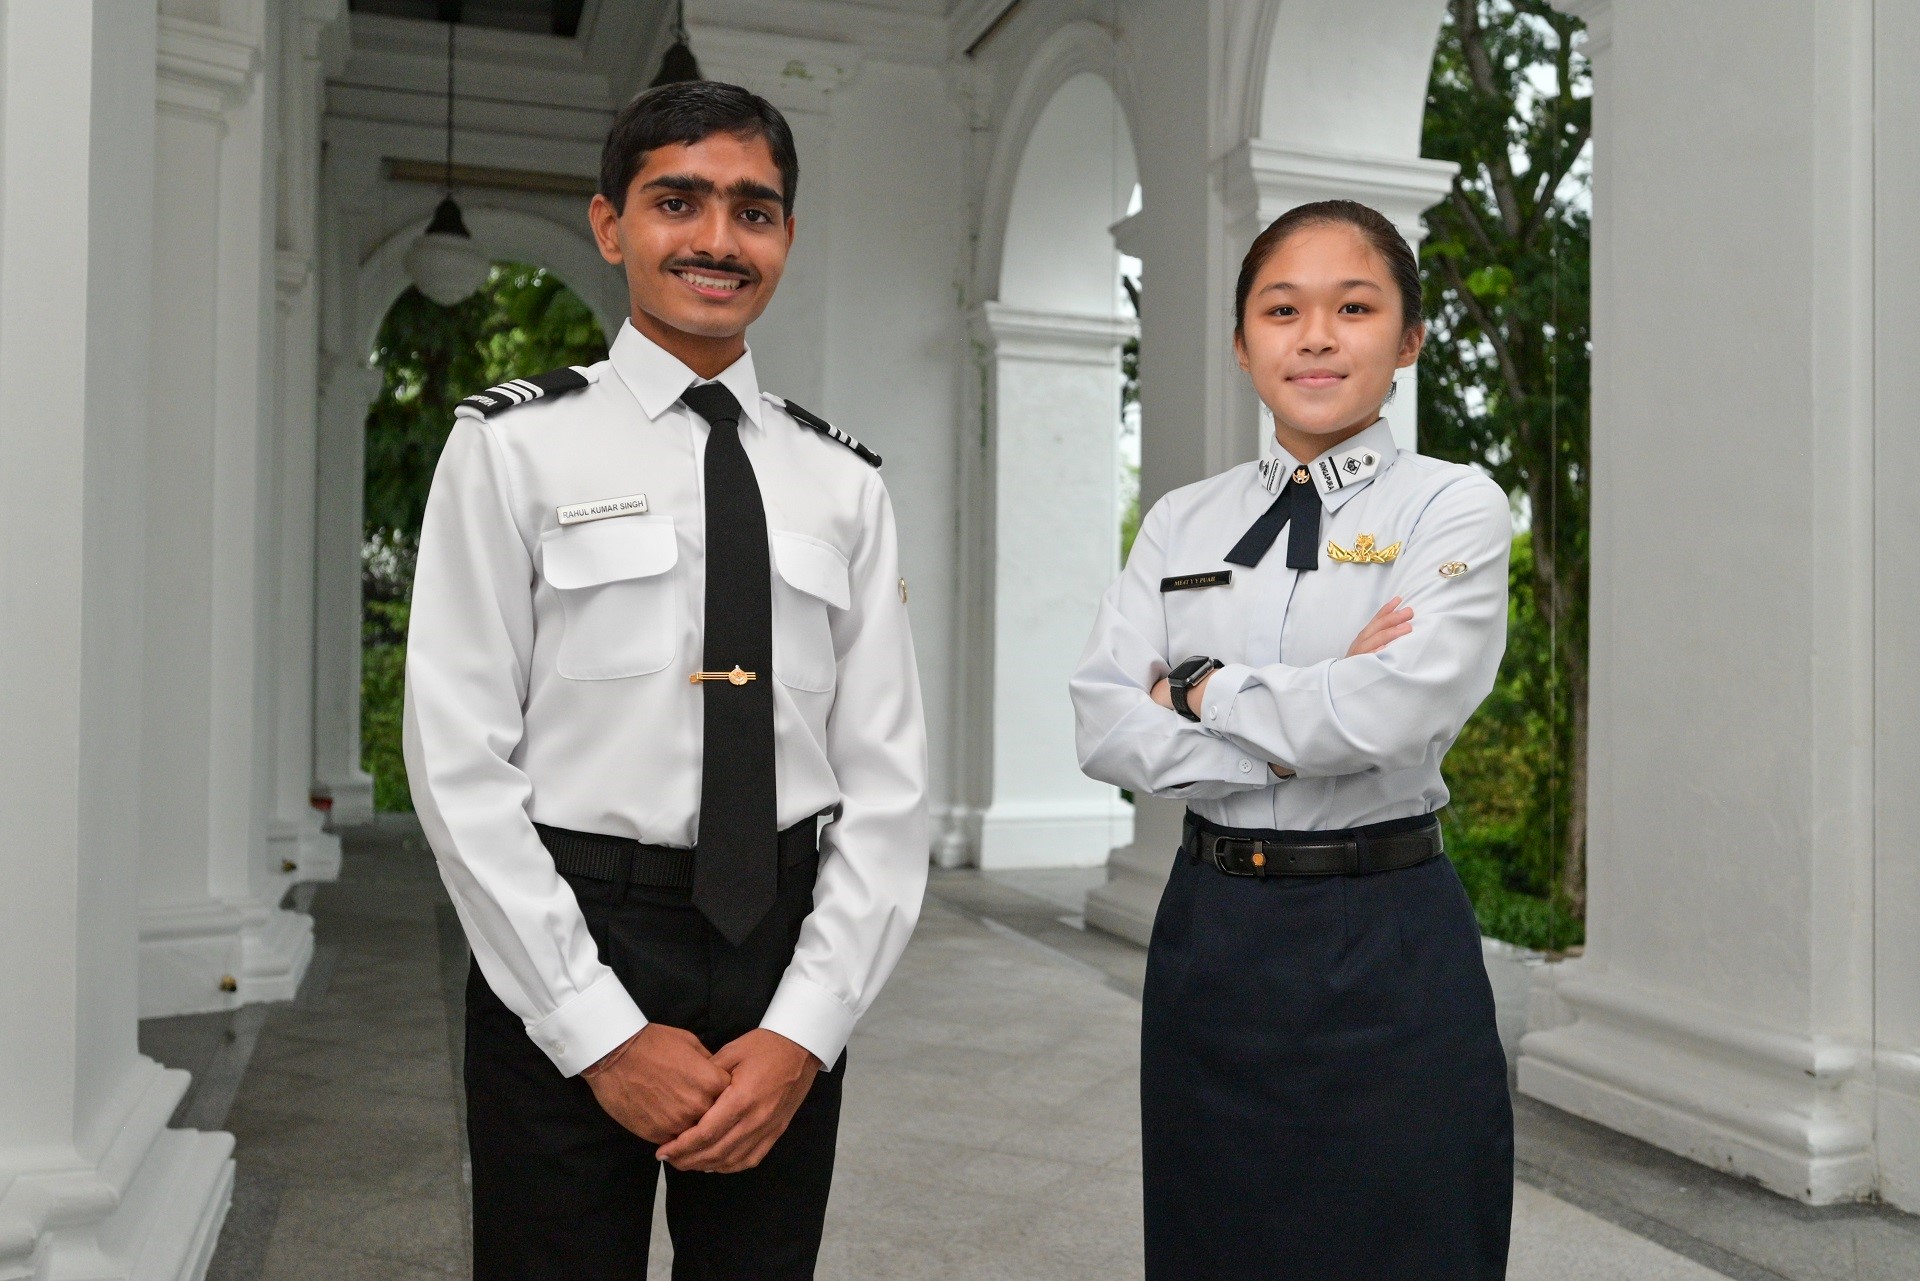 Scholars inspired to be defence leaders of tomorrow